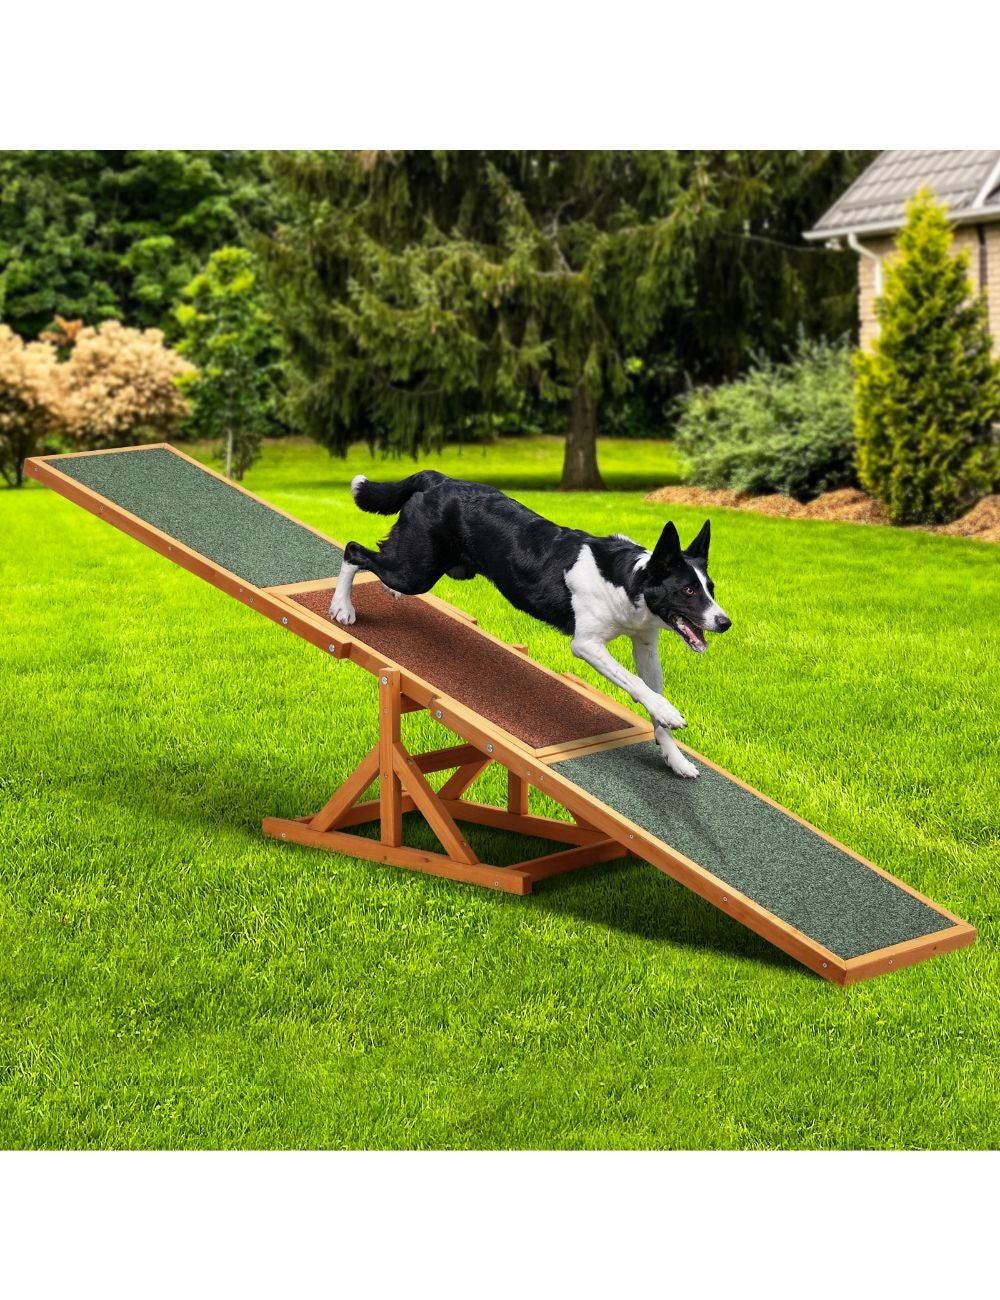 Sports　Alopet　Pet　Obedience　Dog　Play　Training　Puppy　Seesaw　Rockmans　Agility　Outdoor